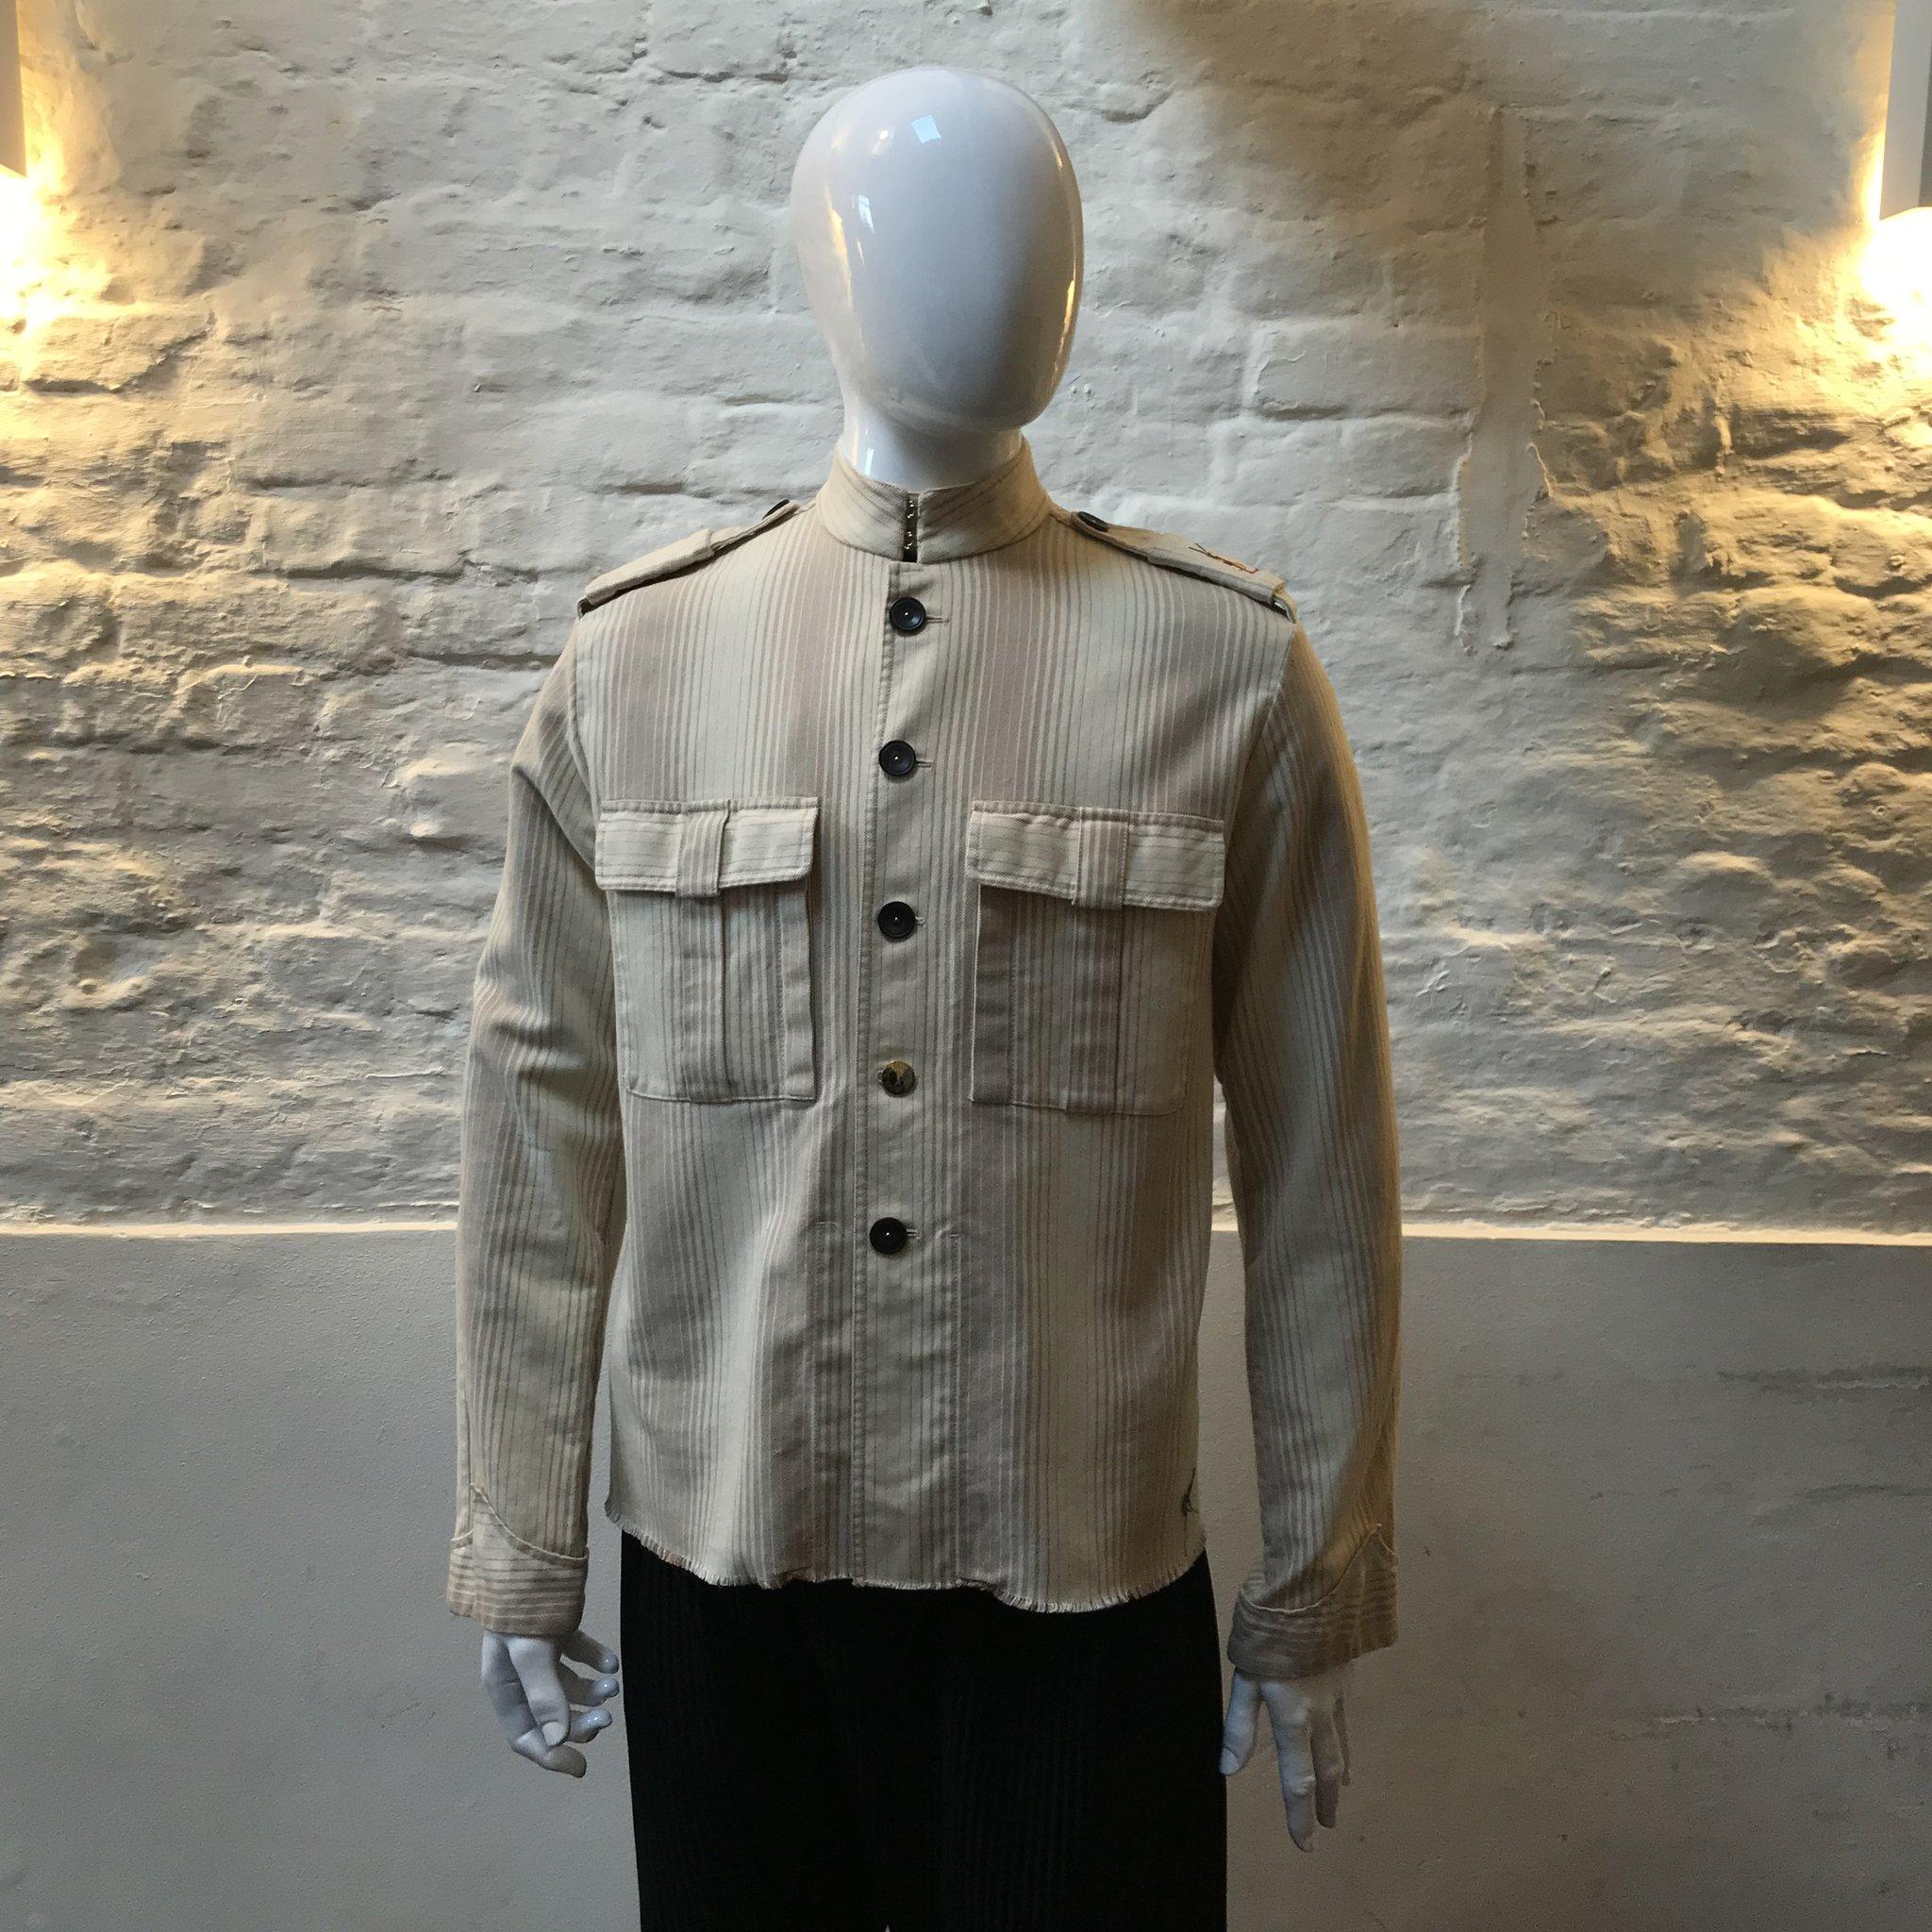 Yves Saint Laurent Rive Gauche Jacket made in France from cotton. 

The couture house of Yves Saint Laurent was founded in 1961 and has since become one of the most influential labels of the 20th century.  Originally a House of Haute Couture, Yves